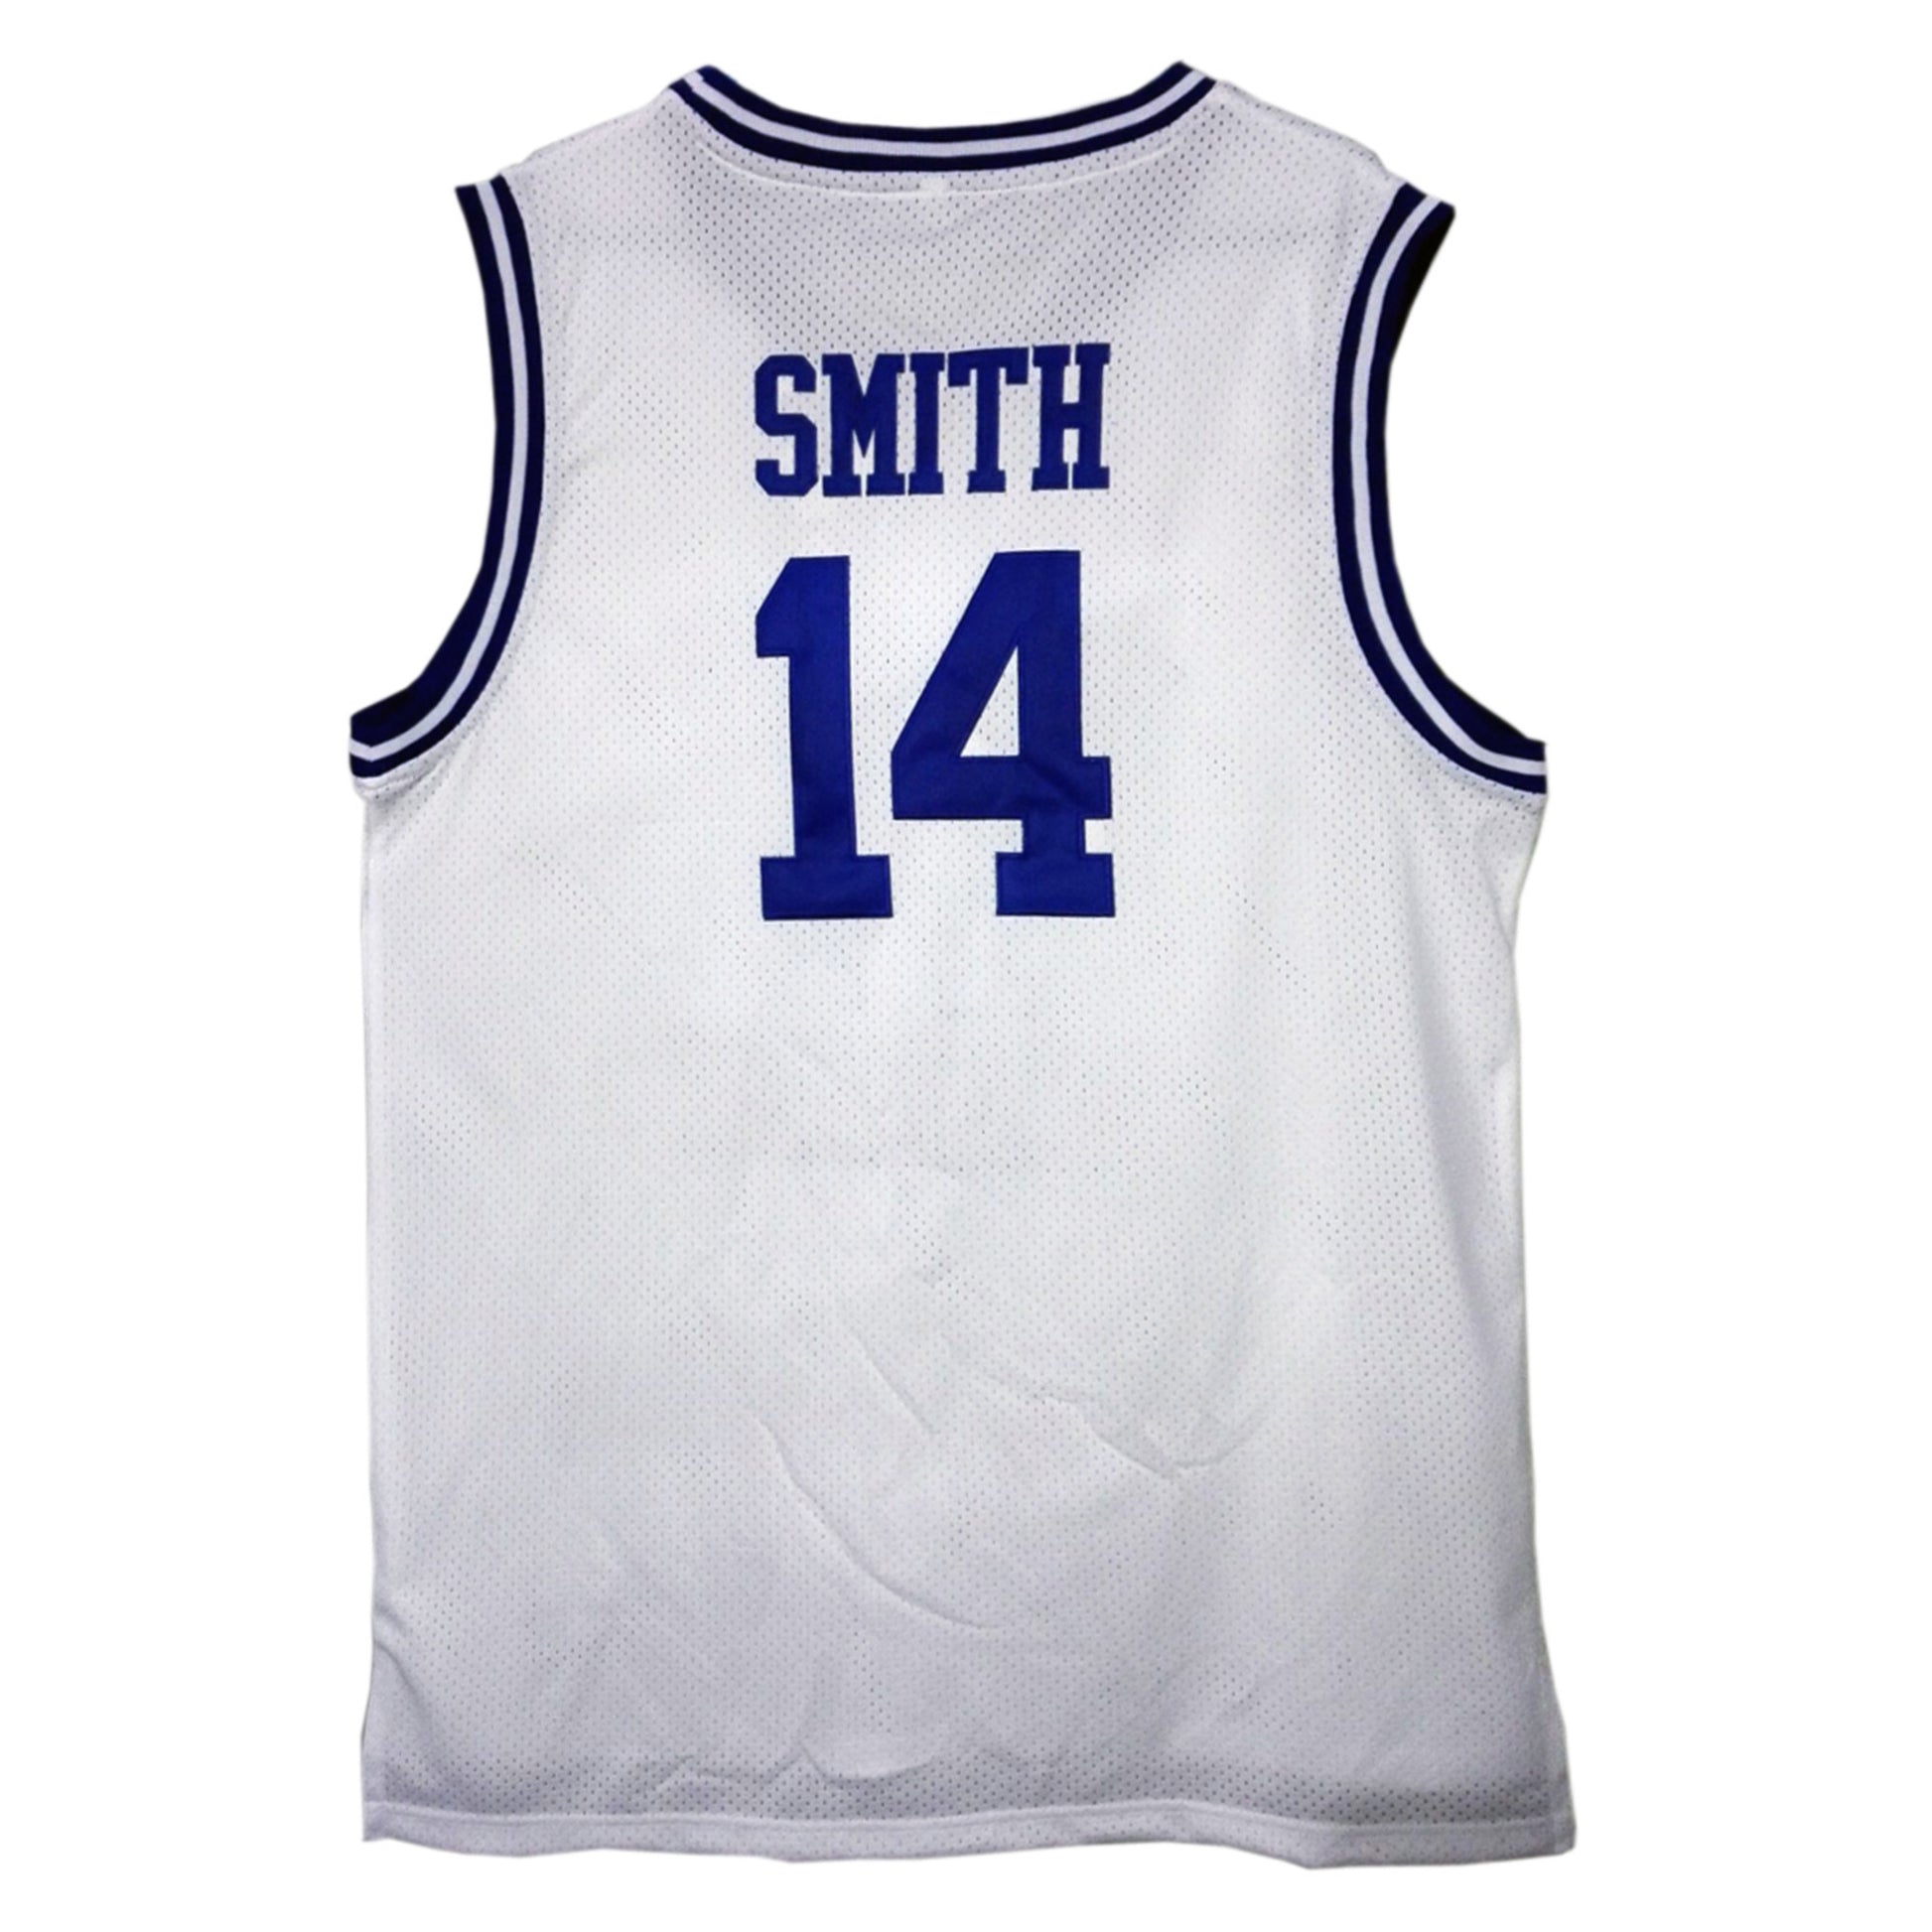 Will Smith Bel Air Academy Stitched Basketball Jersey #14, Green / XL